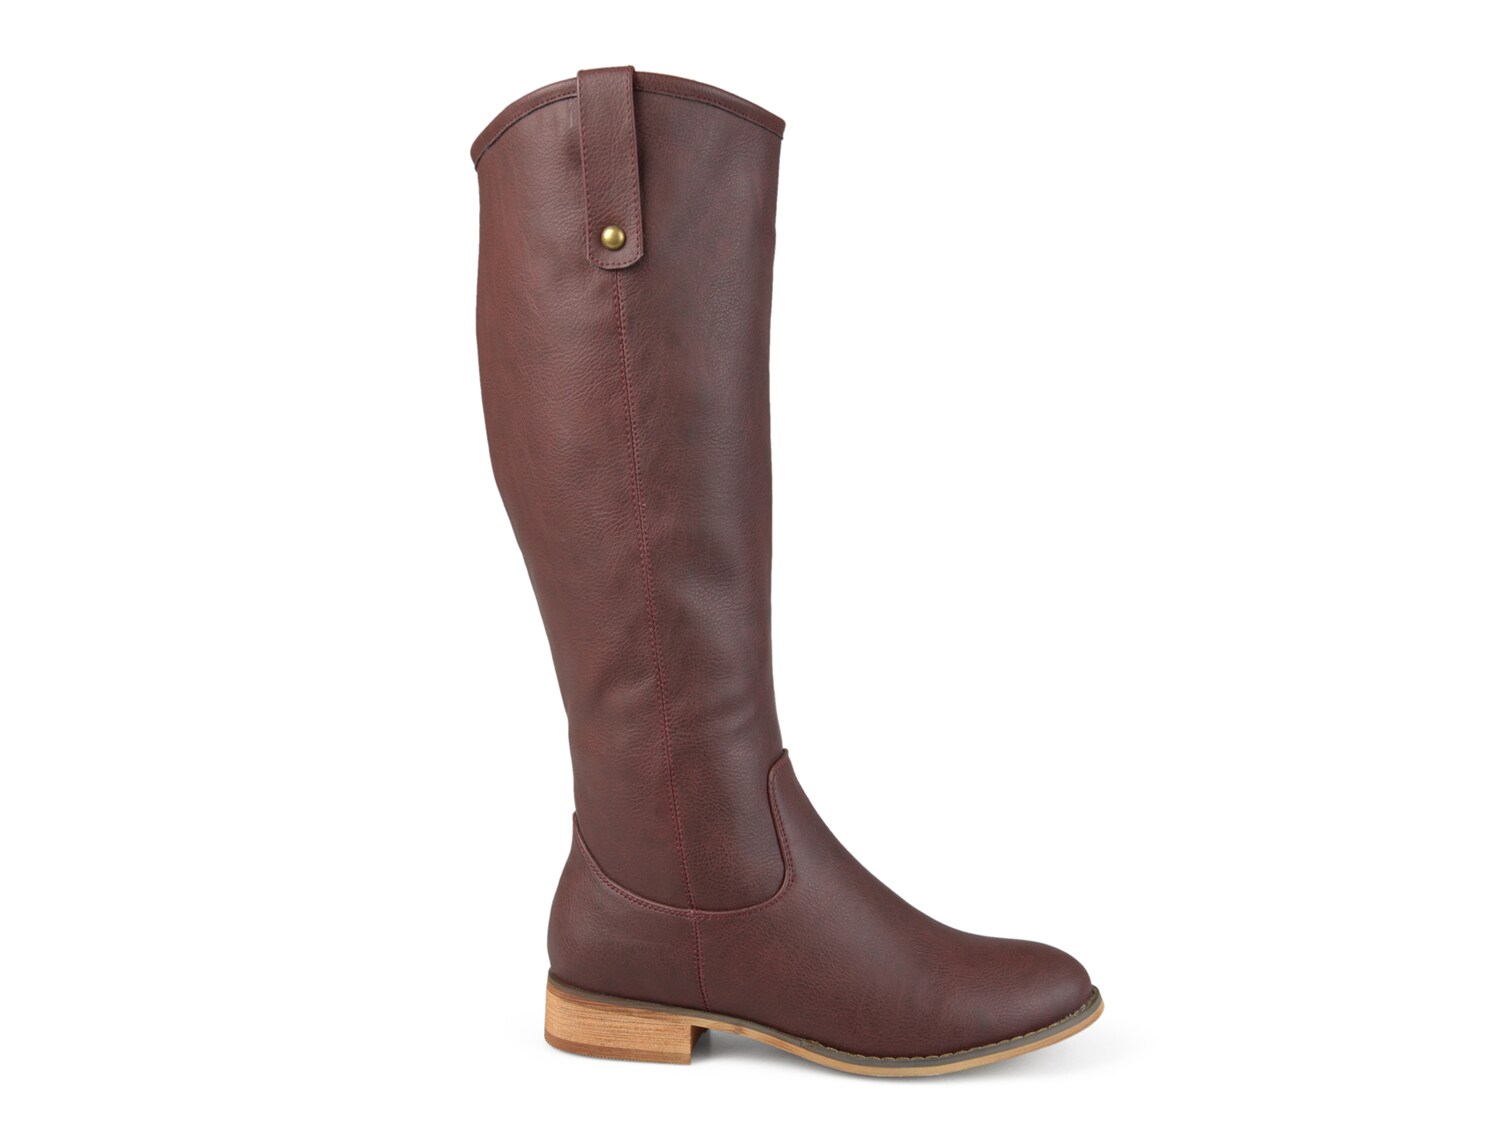 Journee Collection Taven Extra Wide Calf Riding Boot Women's Shoes | DSW